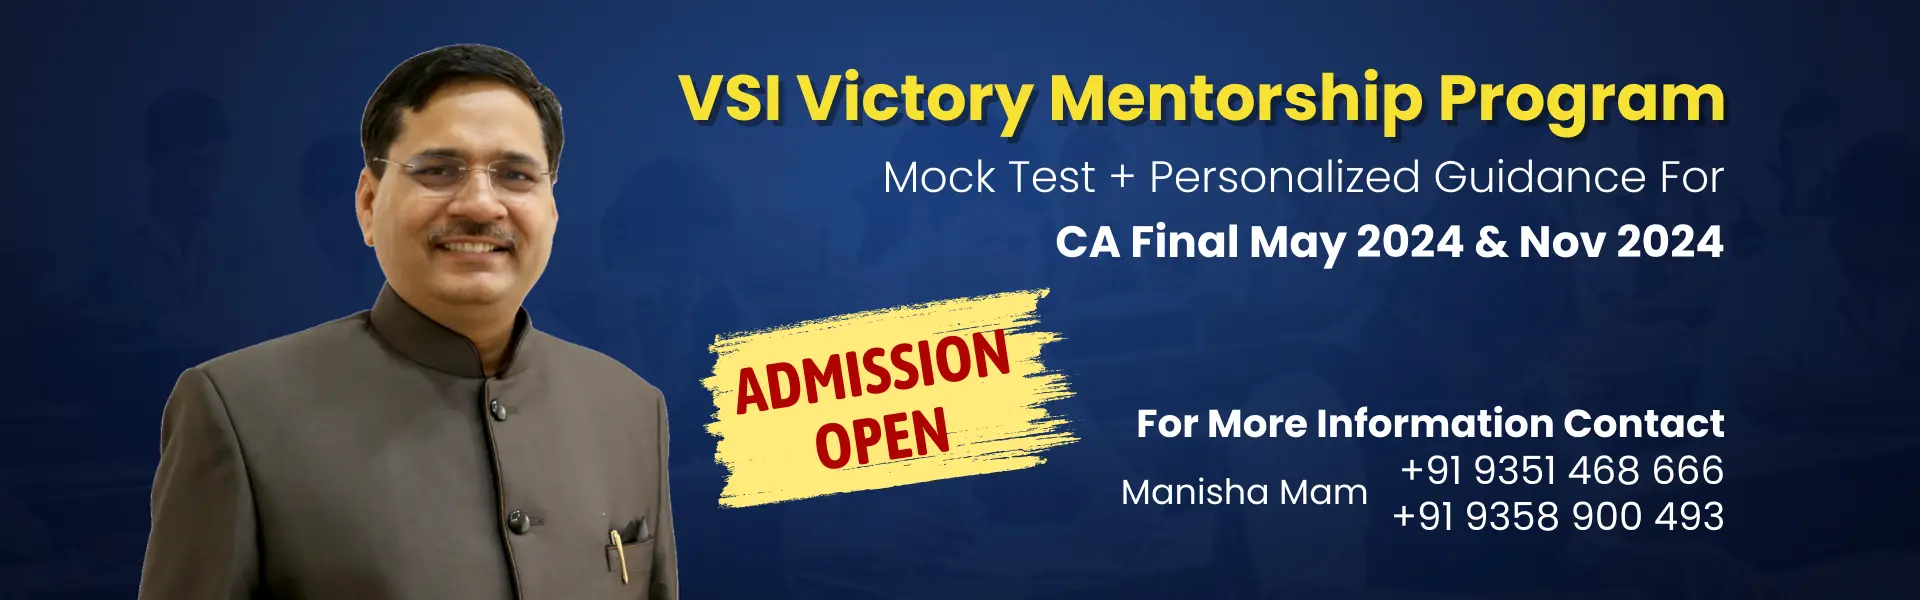 VSI Admission Open VVMP Program for May and Nov 2024 Exams